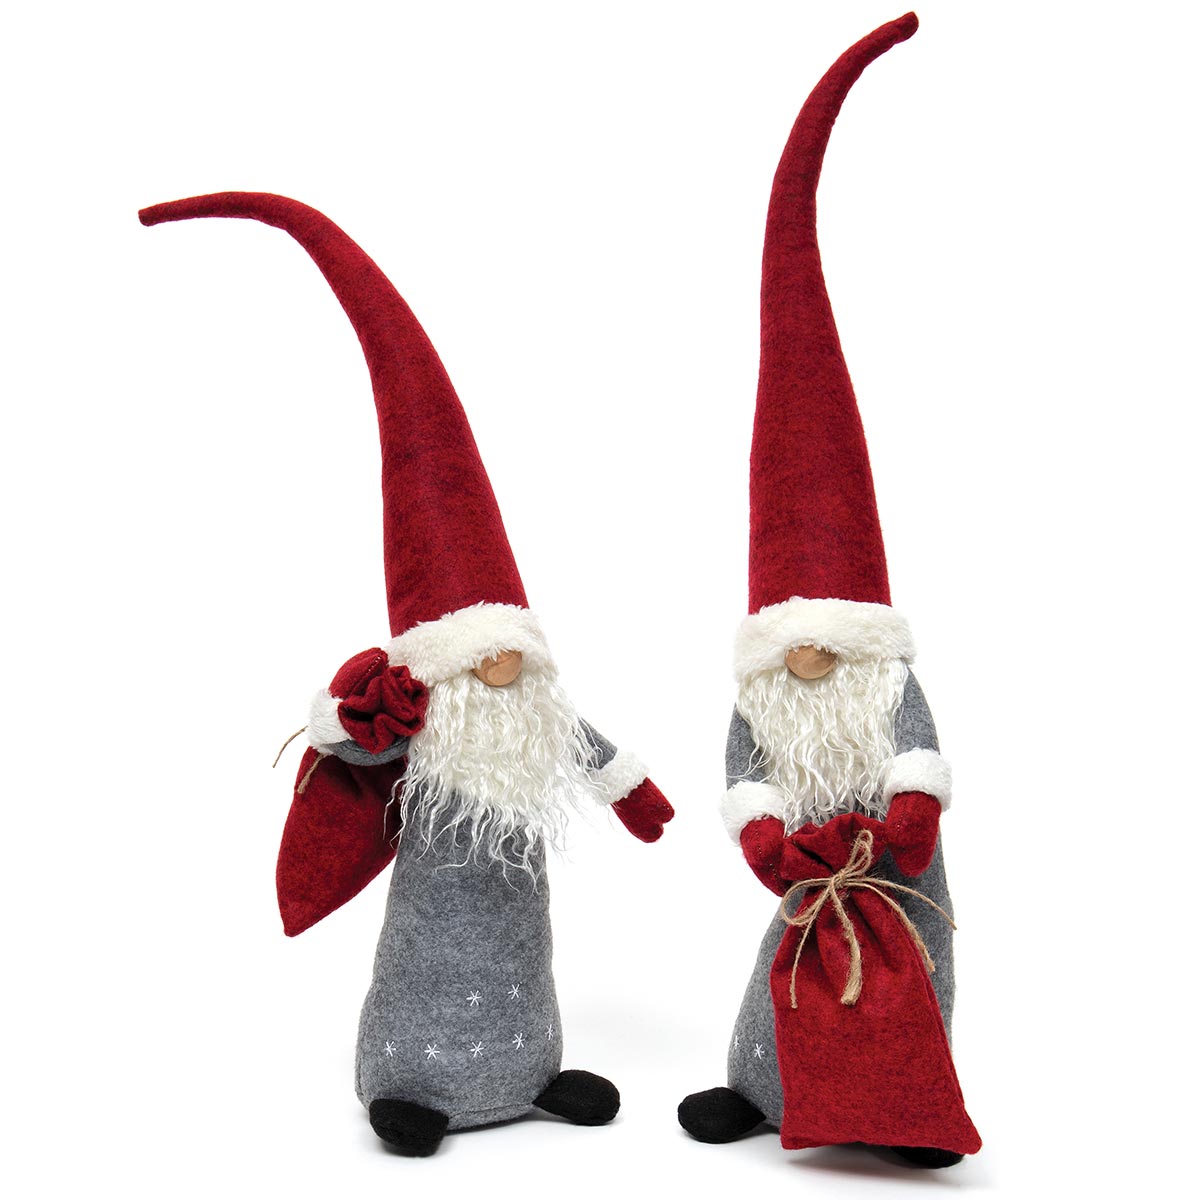 Heave & Ho Gnome Burgundy/Grey with Twine Tied Sack, Set of 2 L